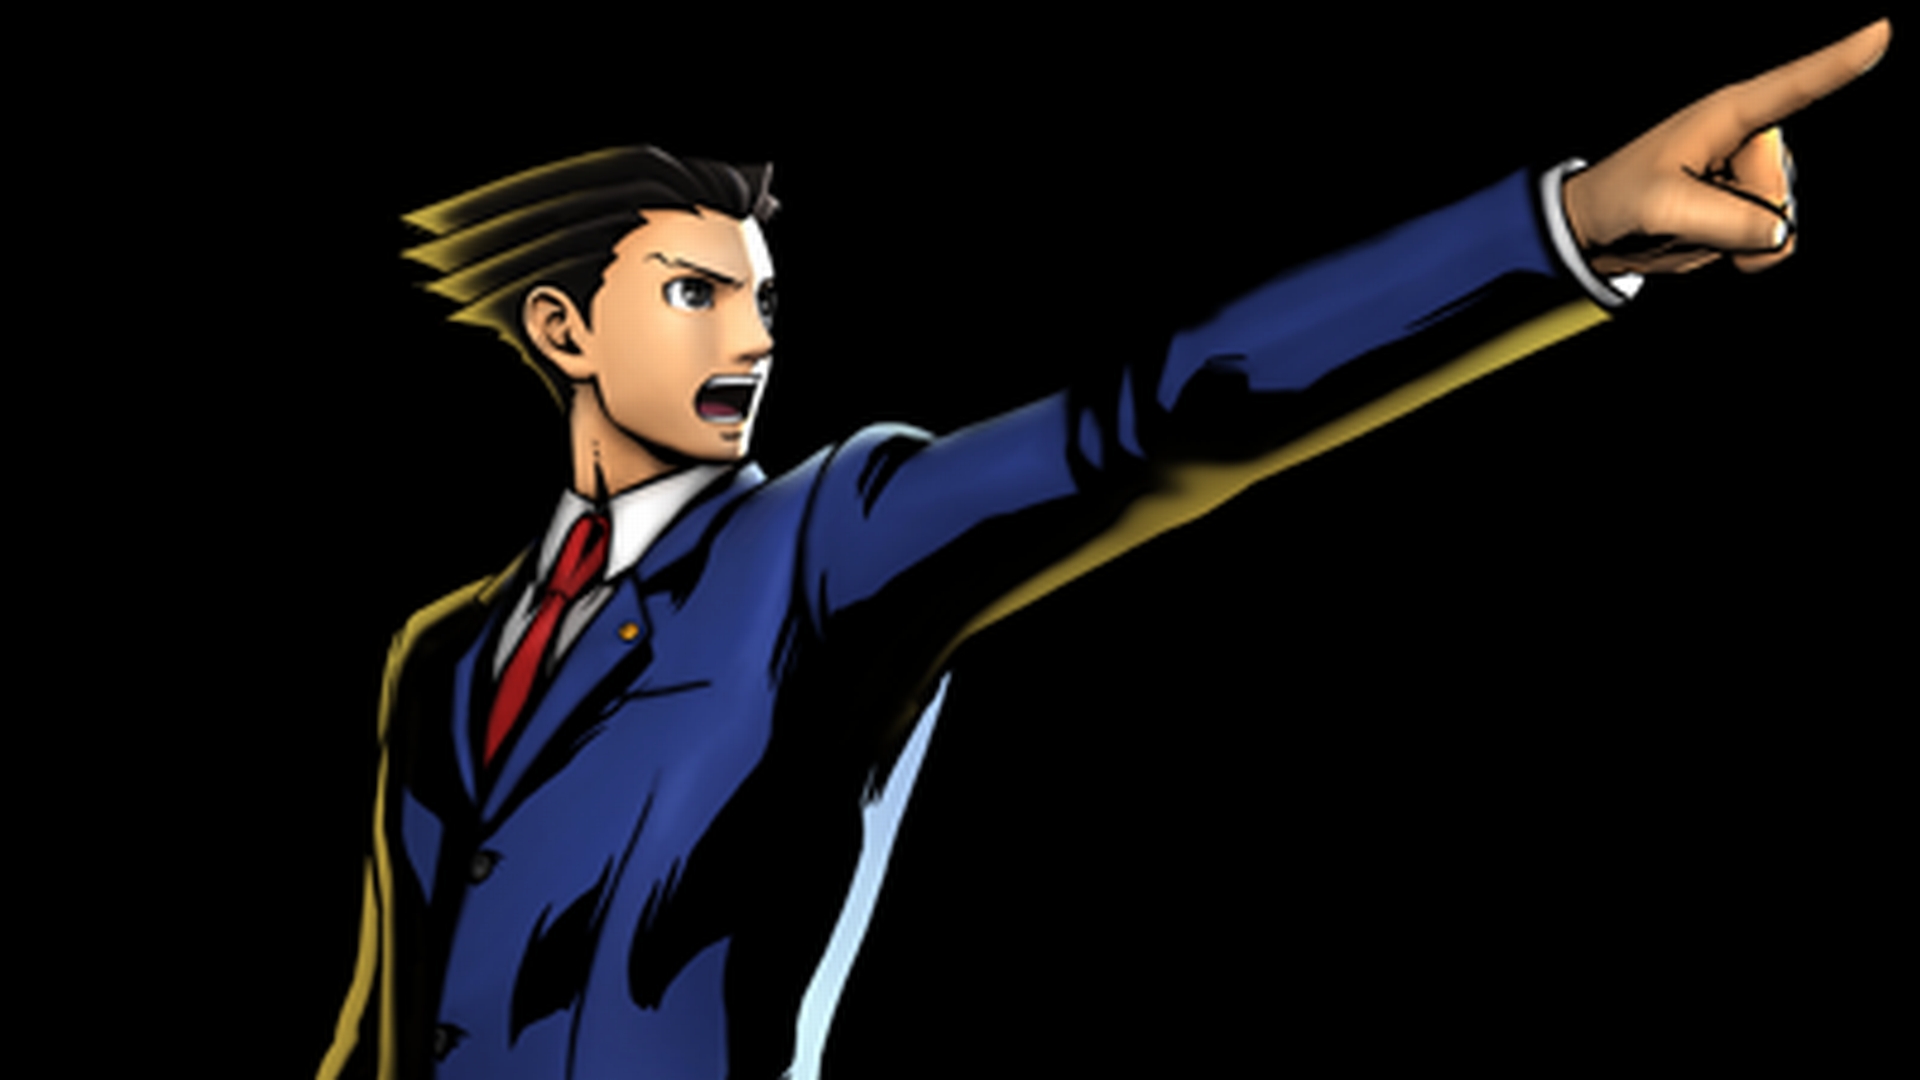 Video Game Phoenix Wright Ace Attorney 1920x1080